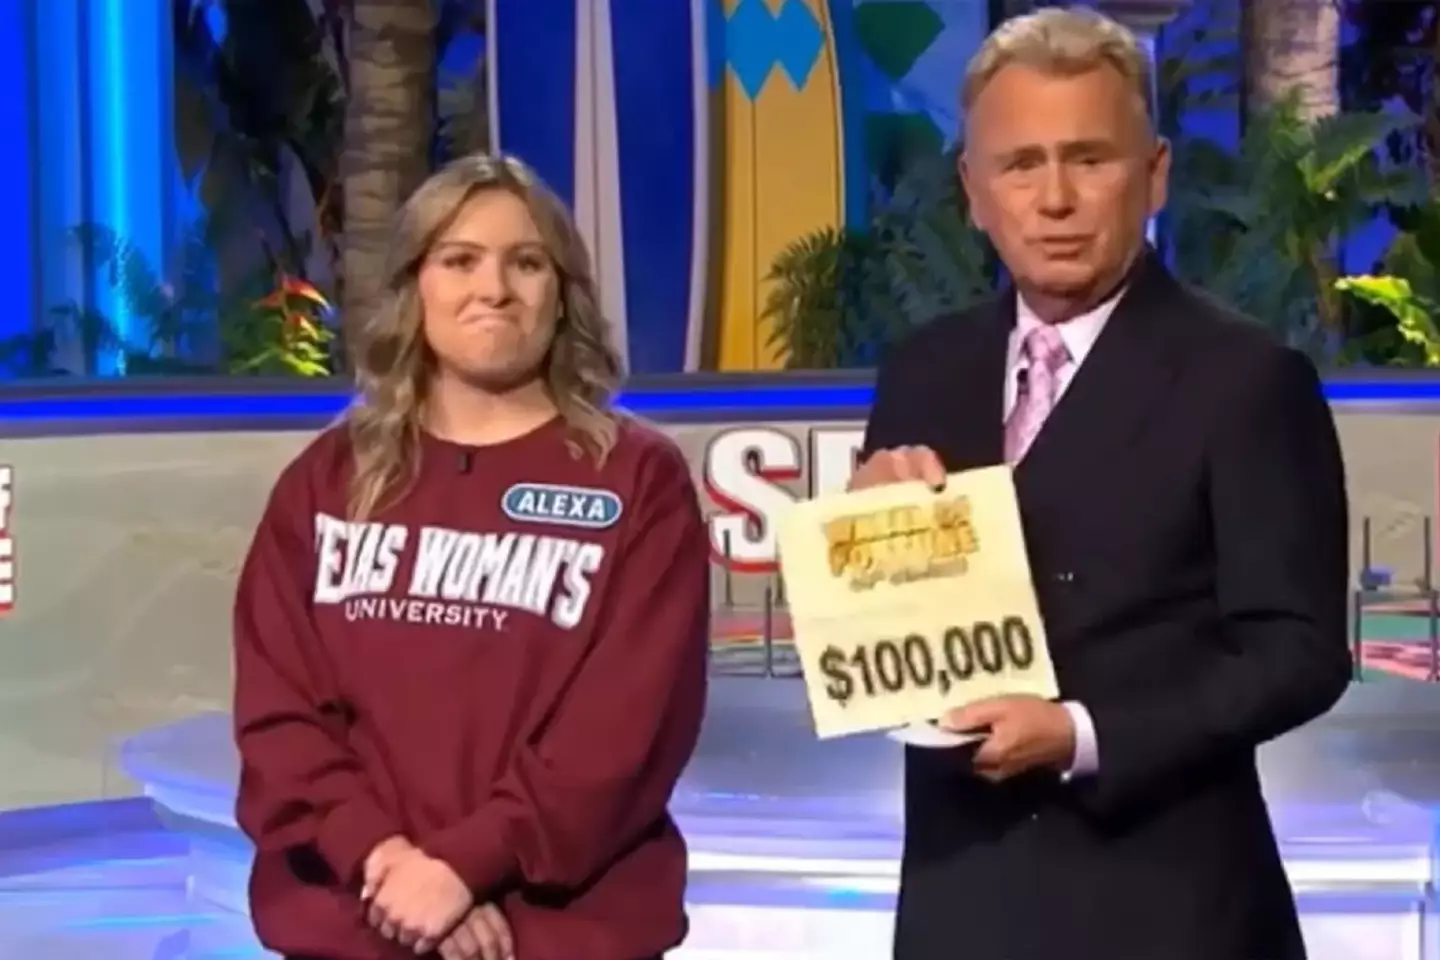 Wheel of Fortune viewers have been left furious at host Pat Sajak after claiming that he 'robbed' a contestant of a $100,000 win.